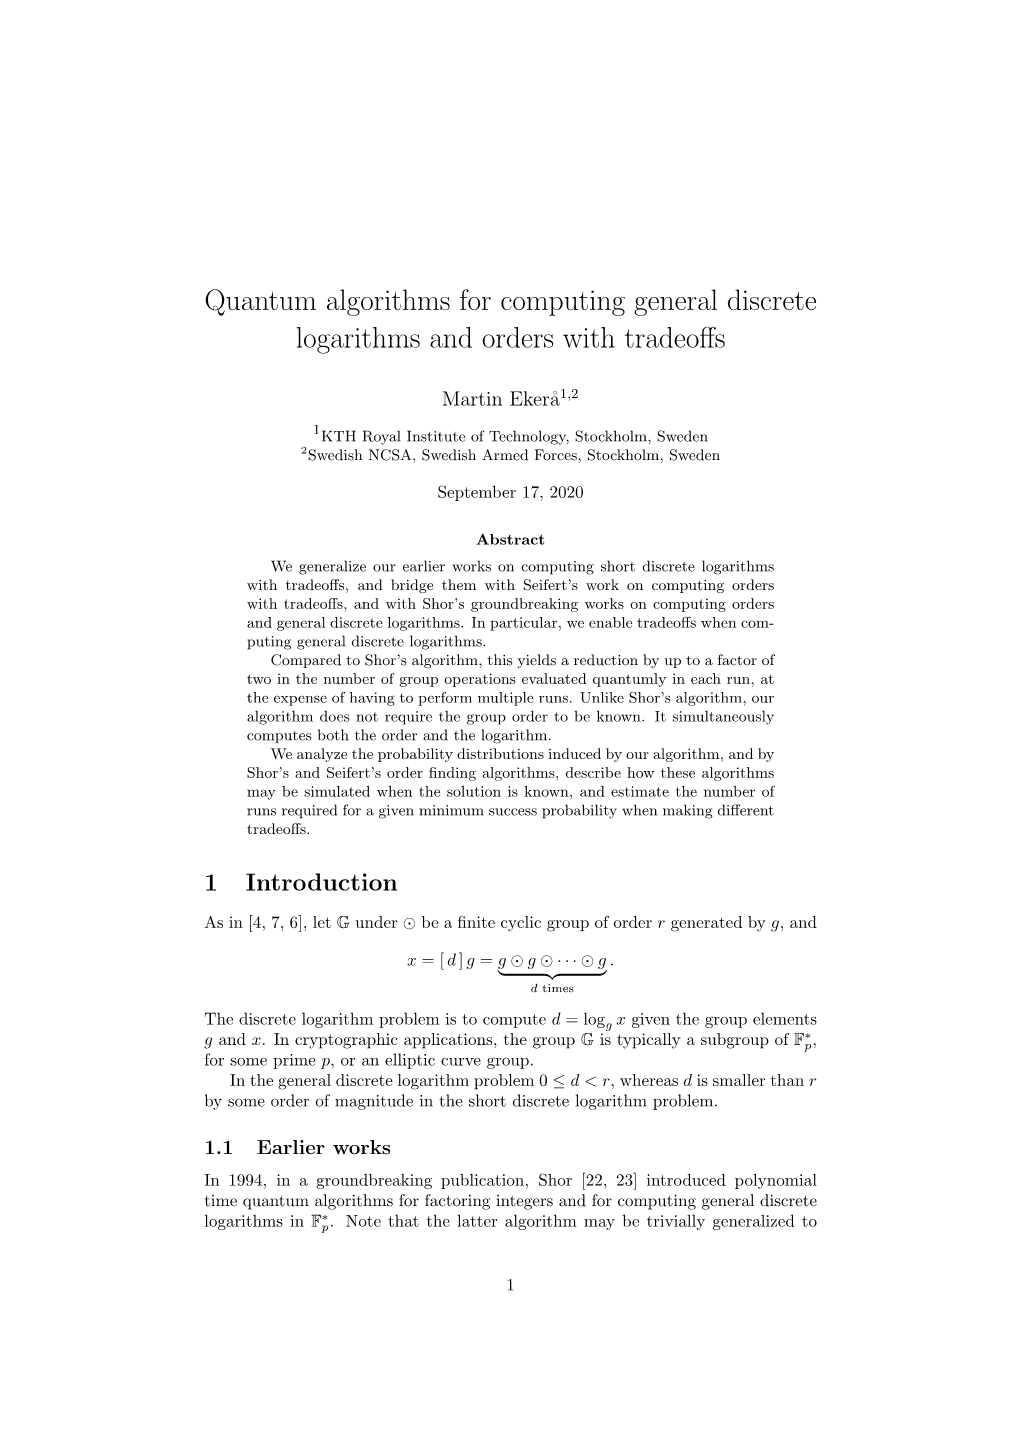 Quantum Algorithms for Computing General Discrete Logarithms and Orders with Tradeoﬀs